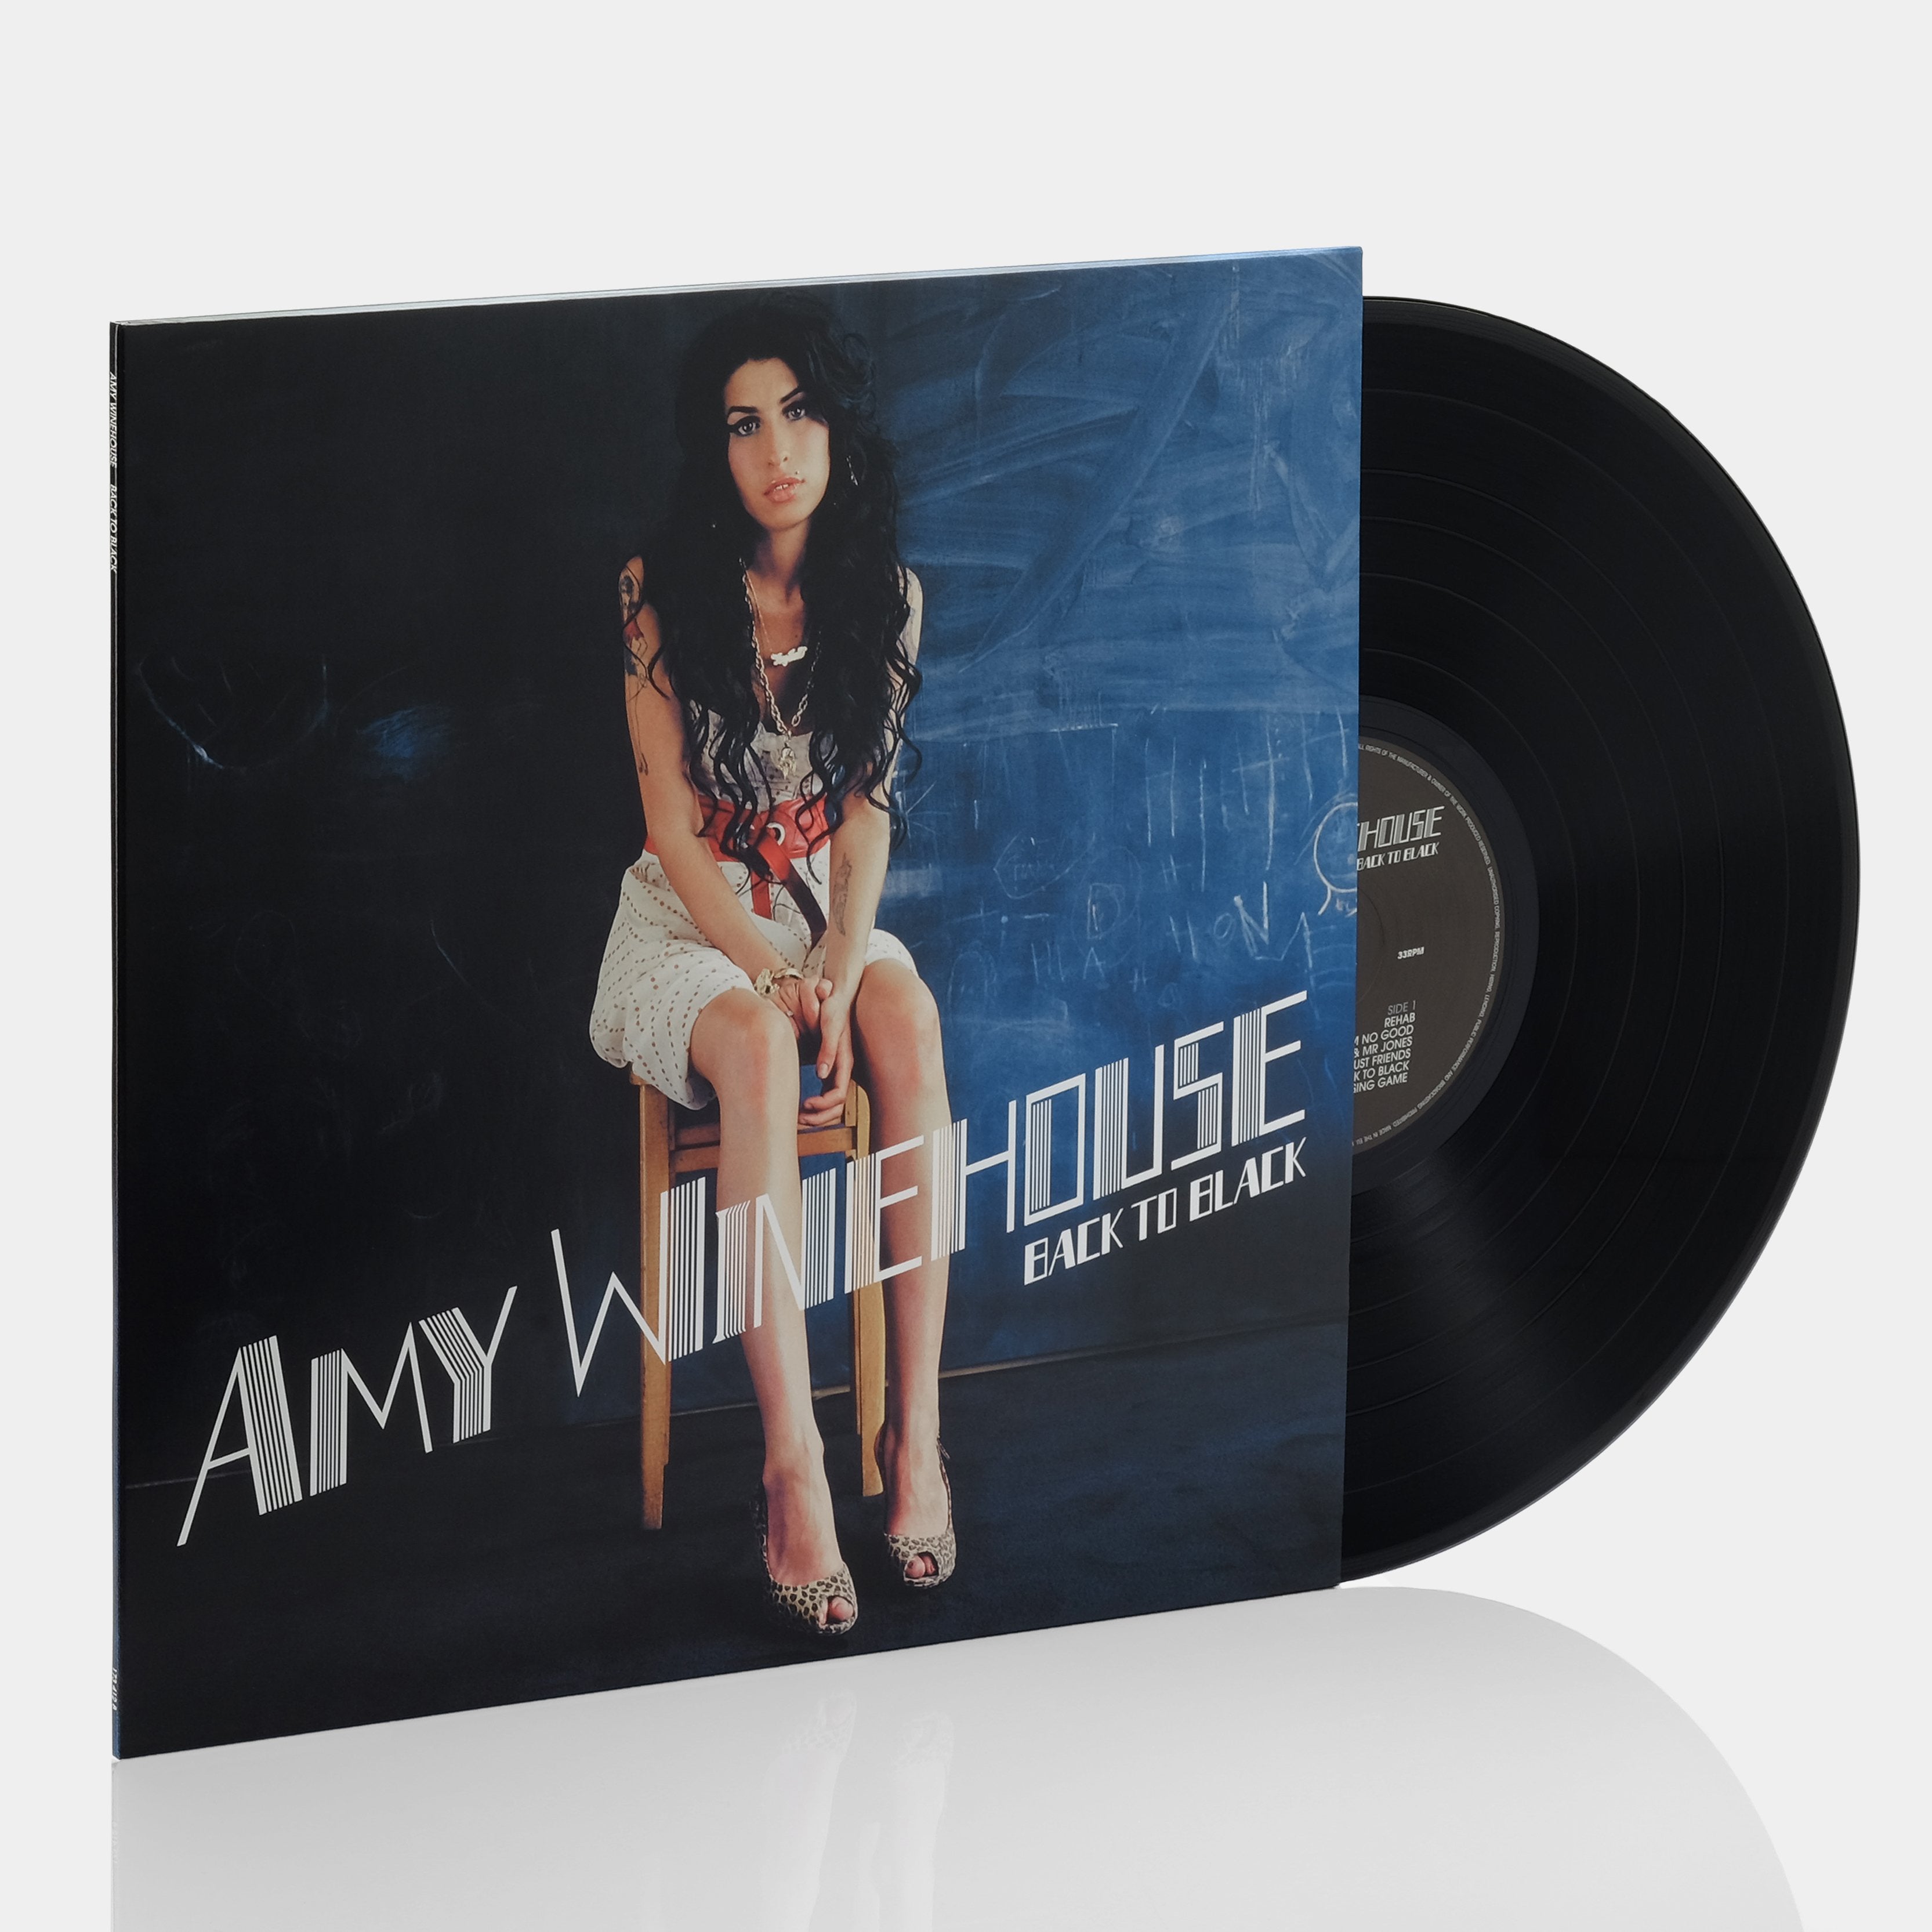 back to black  Amy winehouse, Amy winehouse albums, Music album cover